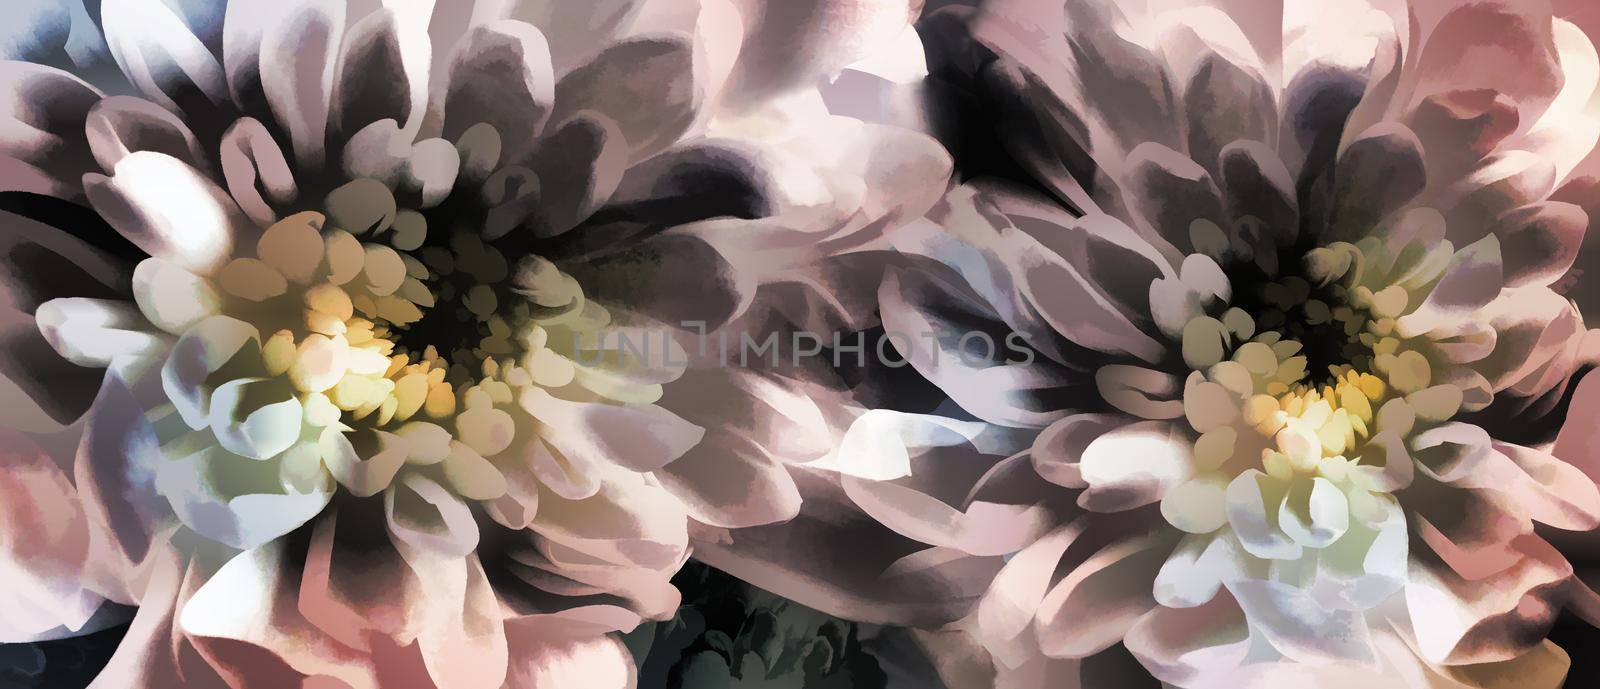 Abstract image of two chrysanthemum flowers in the style of painting. Presented in close-up.